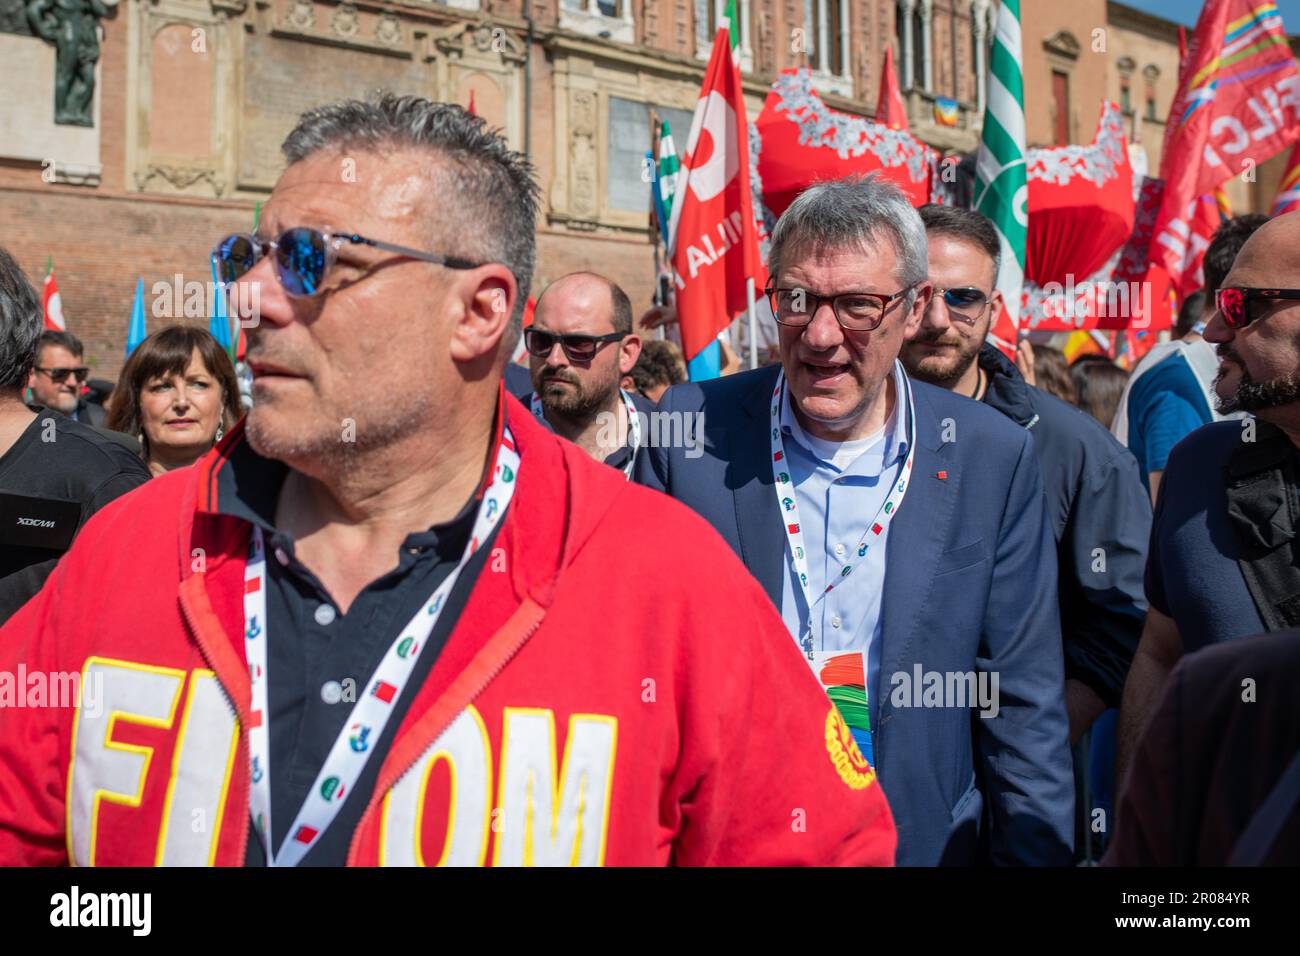 Bologna, Italy. 06th May, 2023. Maurizio Landini, the general secretary of the CGIL goes towards the stage preceded by a FIOM worker before his speech during the trade union demonstration. 30,000 workers took to the streets in Bologna in the demonstration organized by the confederal trade unions CGIL (Italian General Confederation of Labour), CISL (Italian Confederation of Trades Unions), UIL (Italian Labour Union) to protest against the Meloni government's work decree. Elly Schlein was disputed by some UIL workers to avoid politicizing of a workers' demonstration. During the intervention from Stock Photo